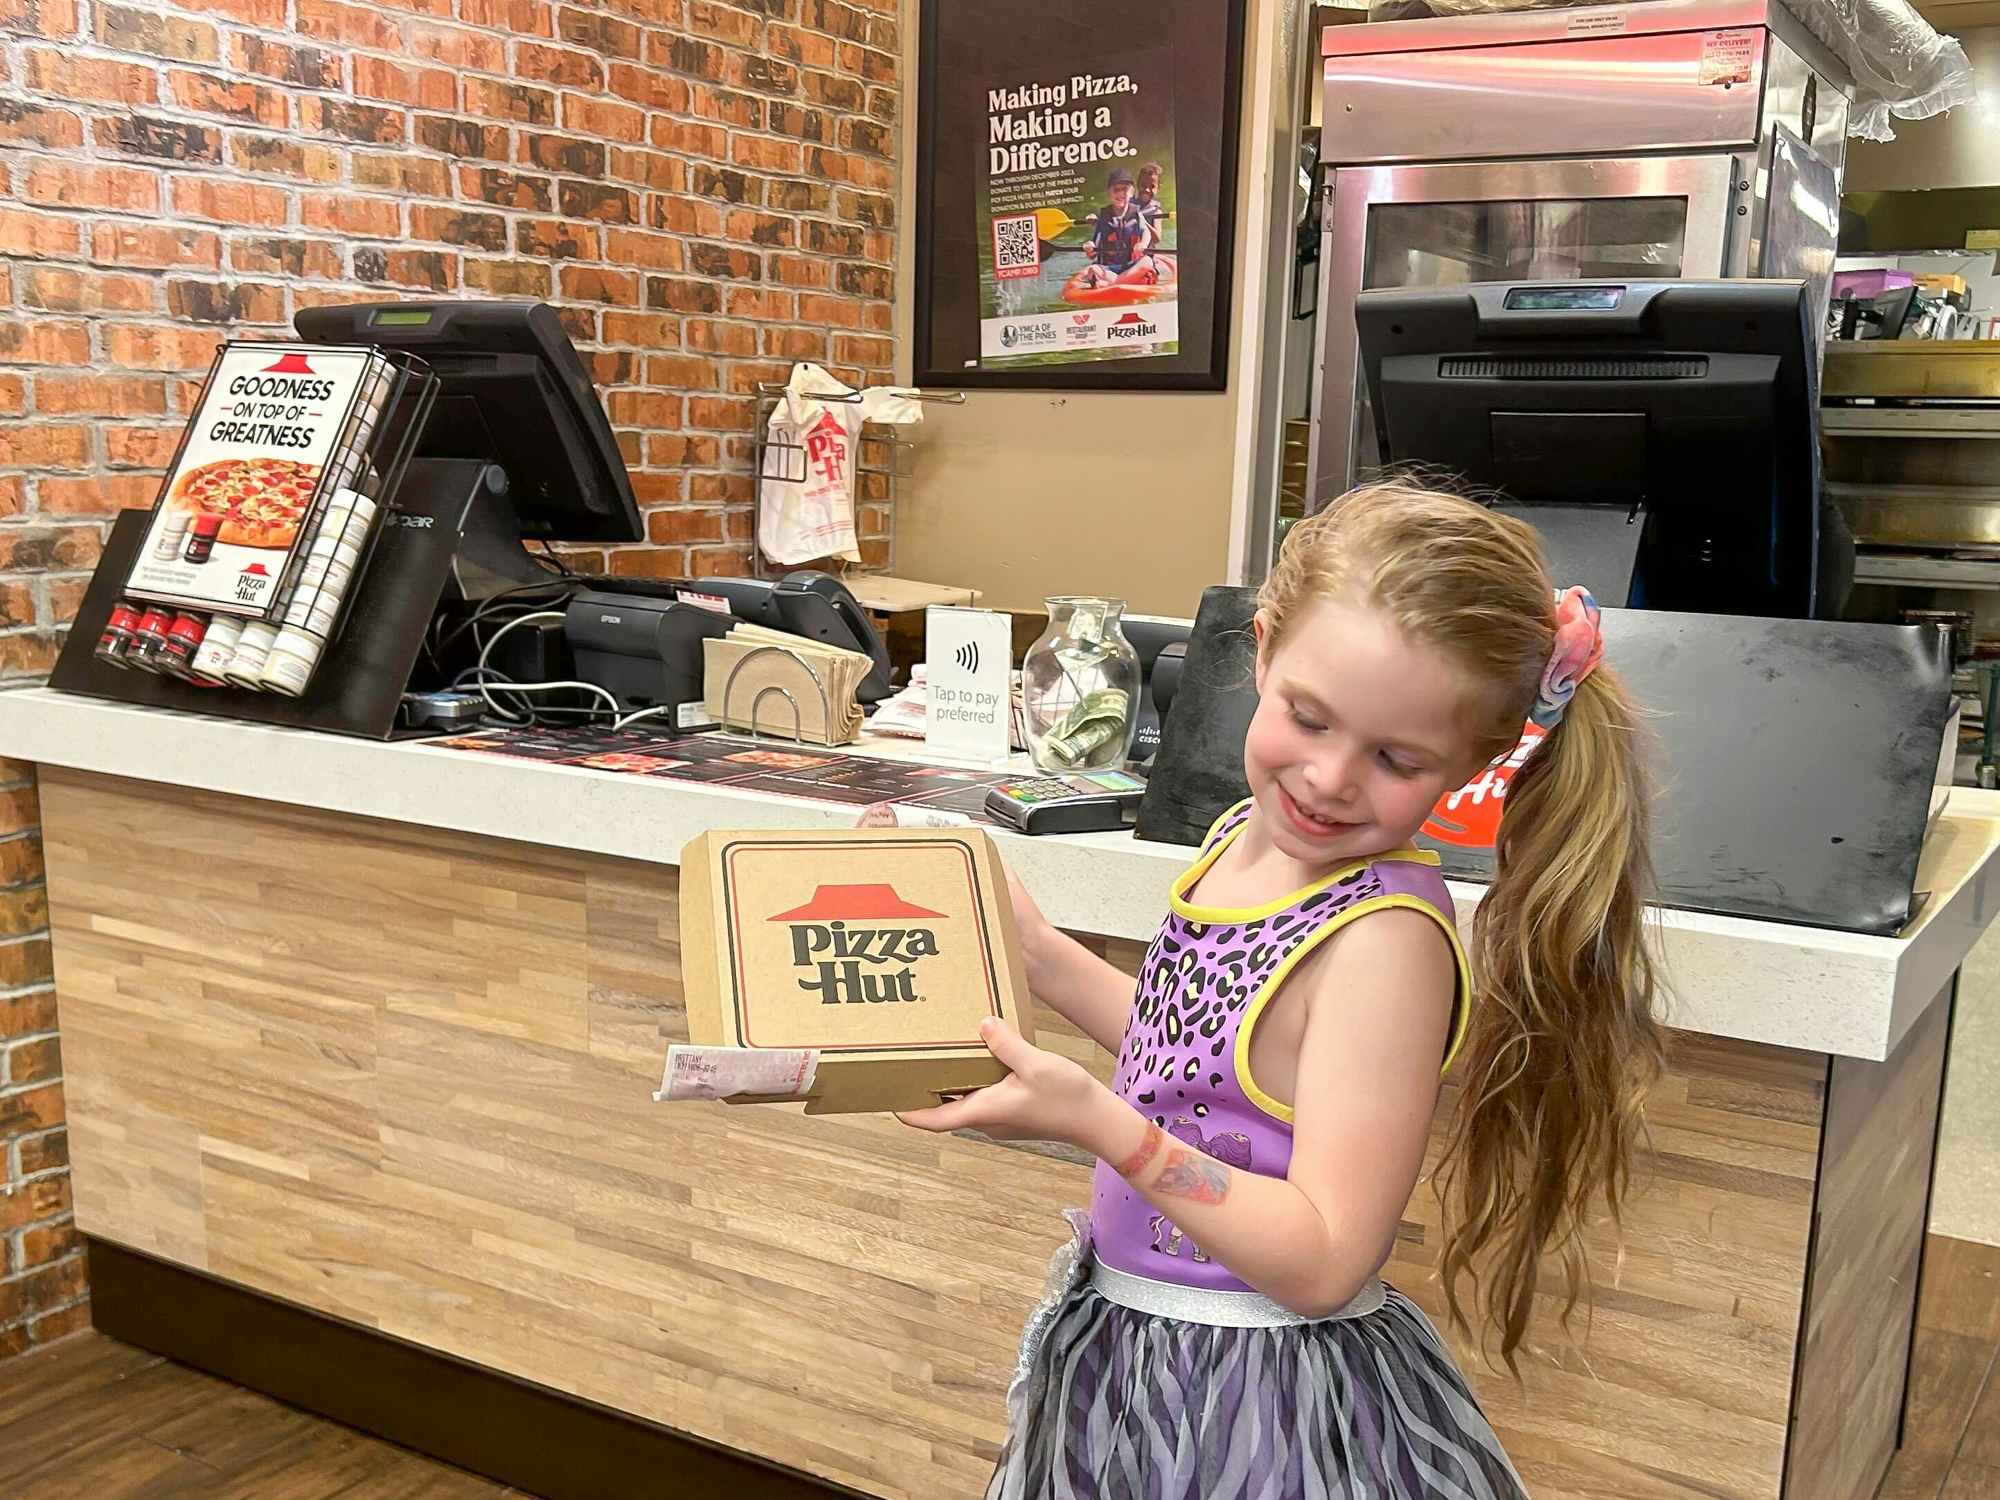 A little girl holding a personal pizza from Pizza Hut with a receipt showing it being free with the Book It promotion